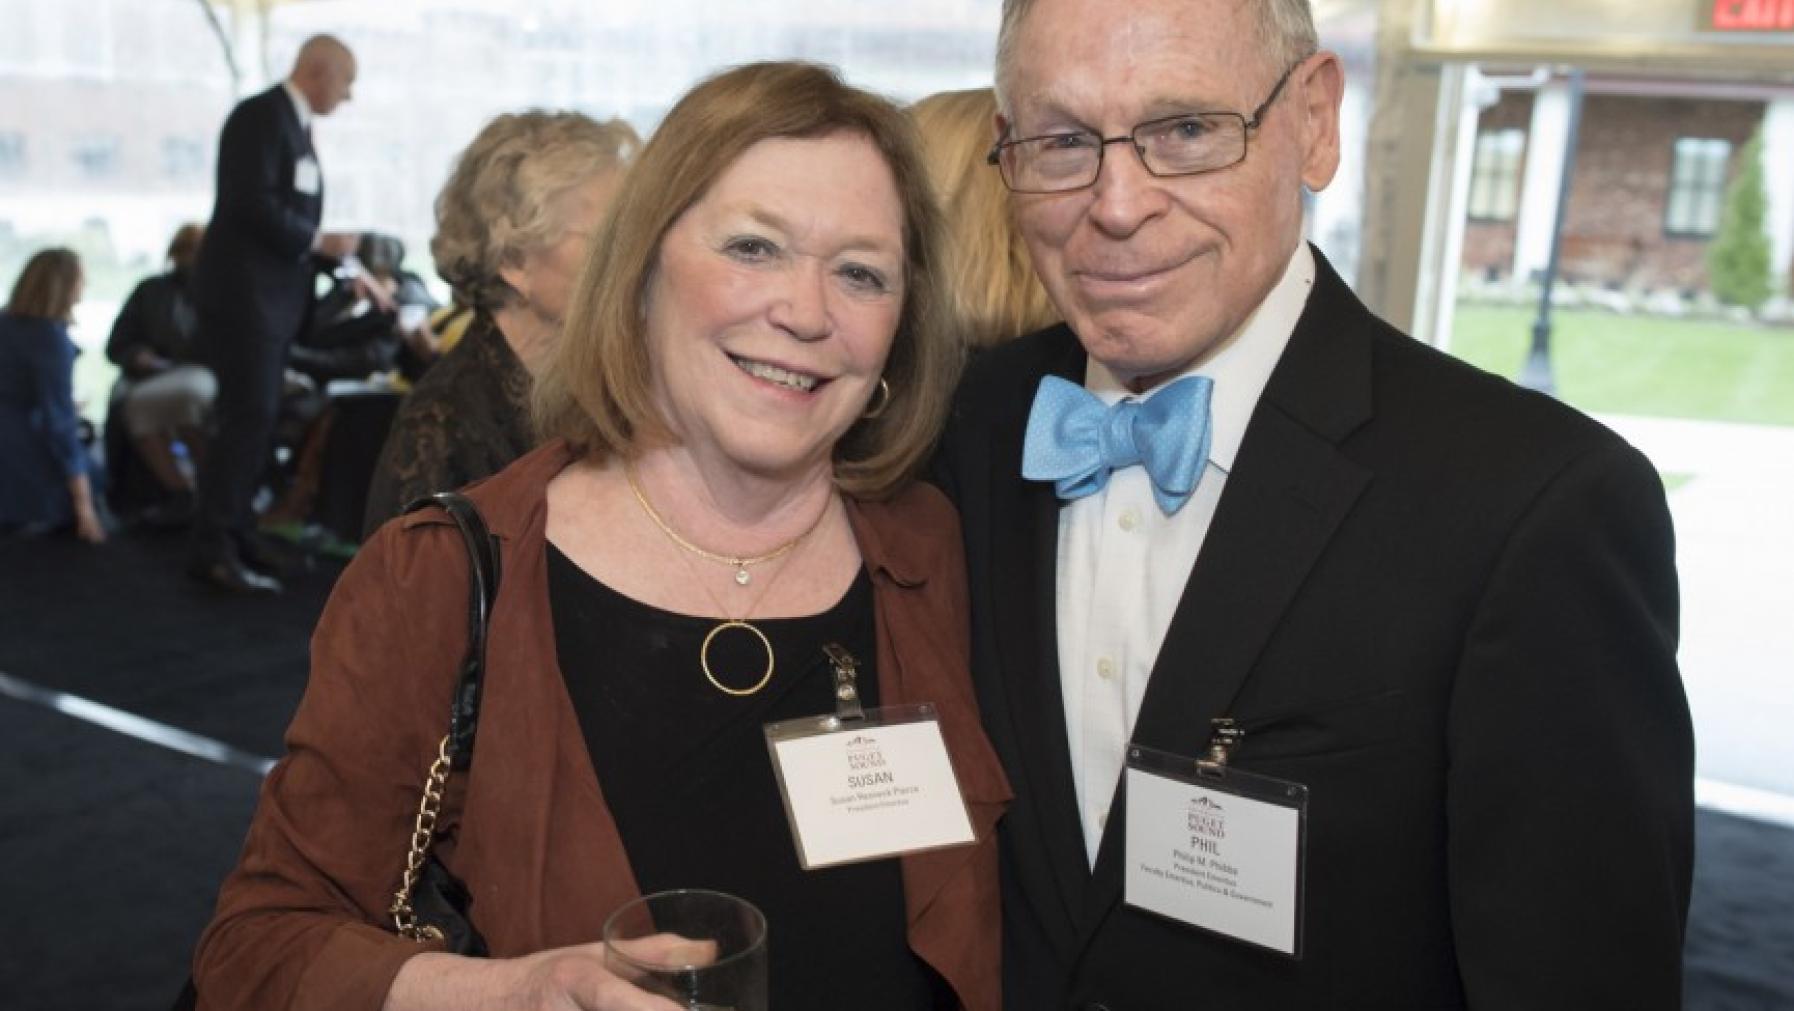 Presidents Emeriti Susan Resneck Pierce and Phil Phibbs at the reception following the Installation Ceremony. Photo by Ross Mulhausen.